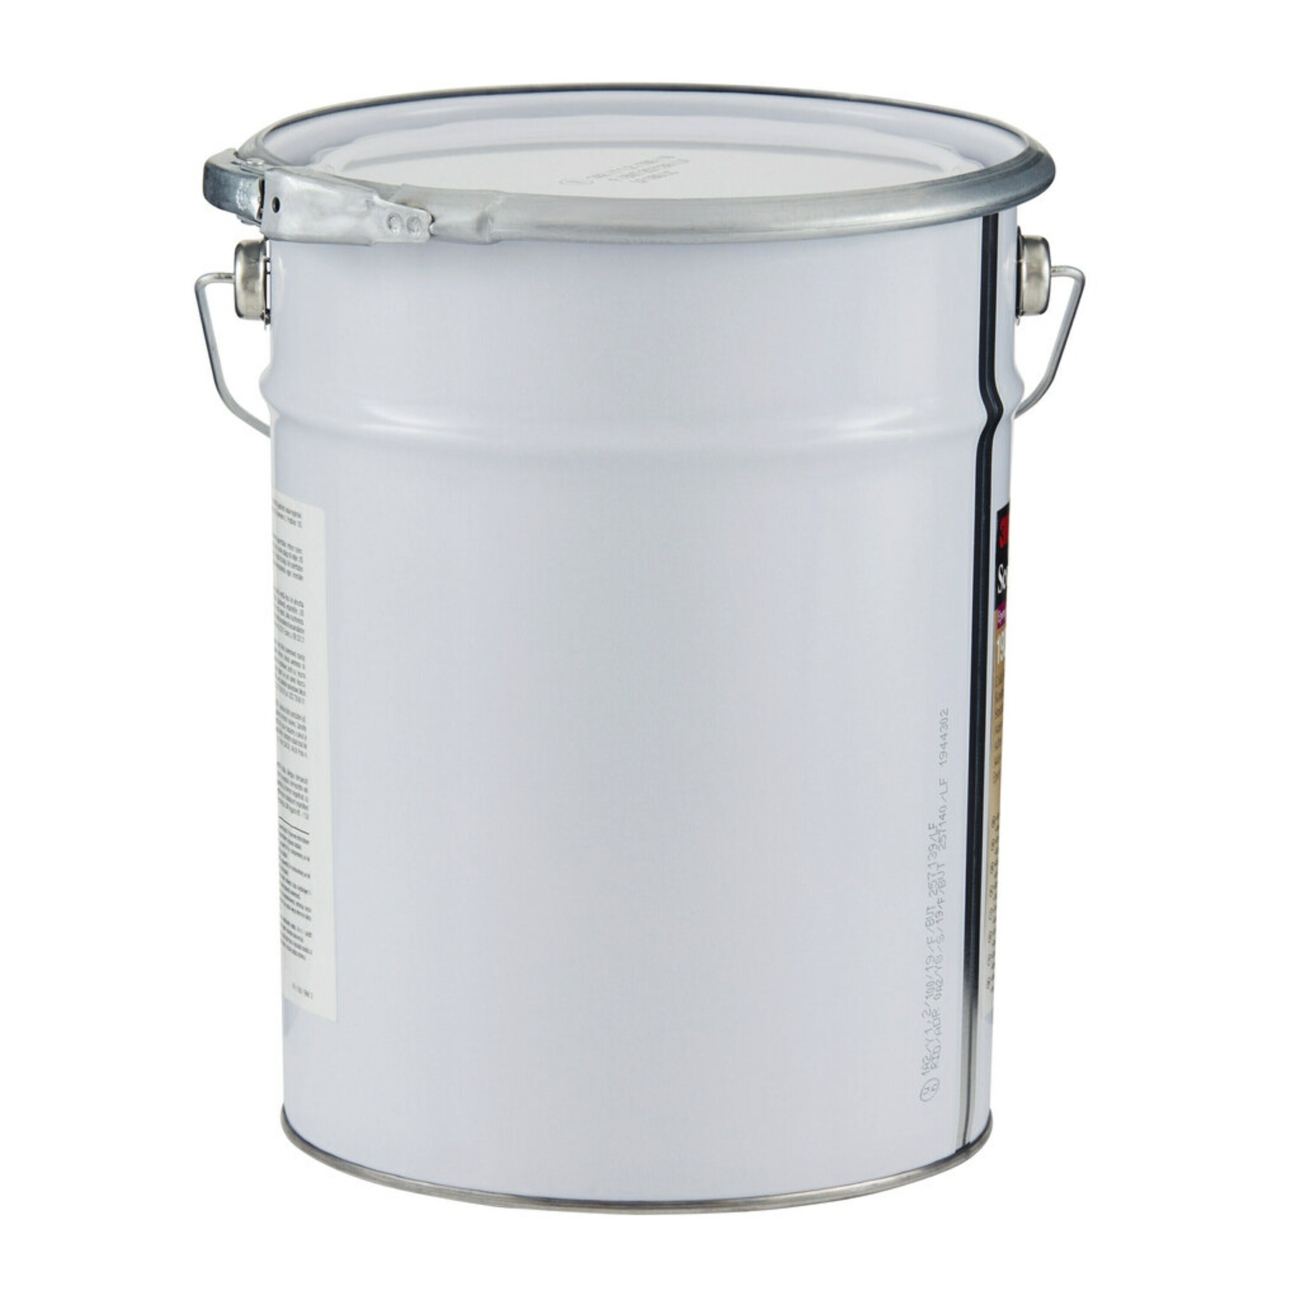 3M Scotch-Weld 2-component construction adhesive based on epoxy resin DP190 Grey, component B, container 18 liters